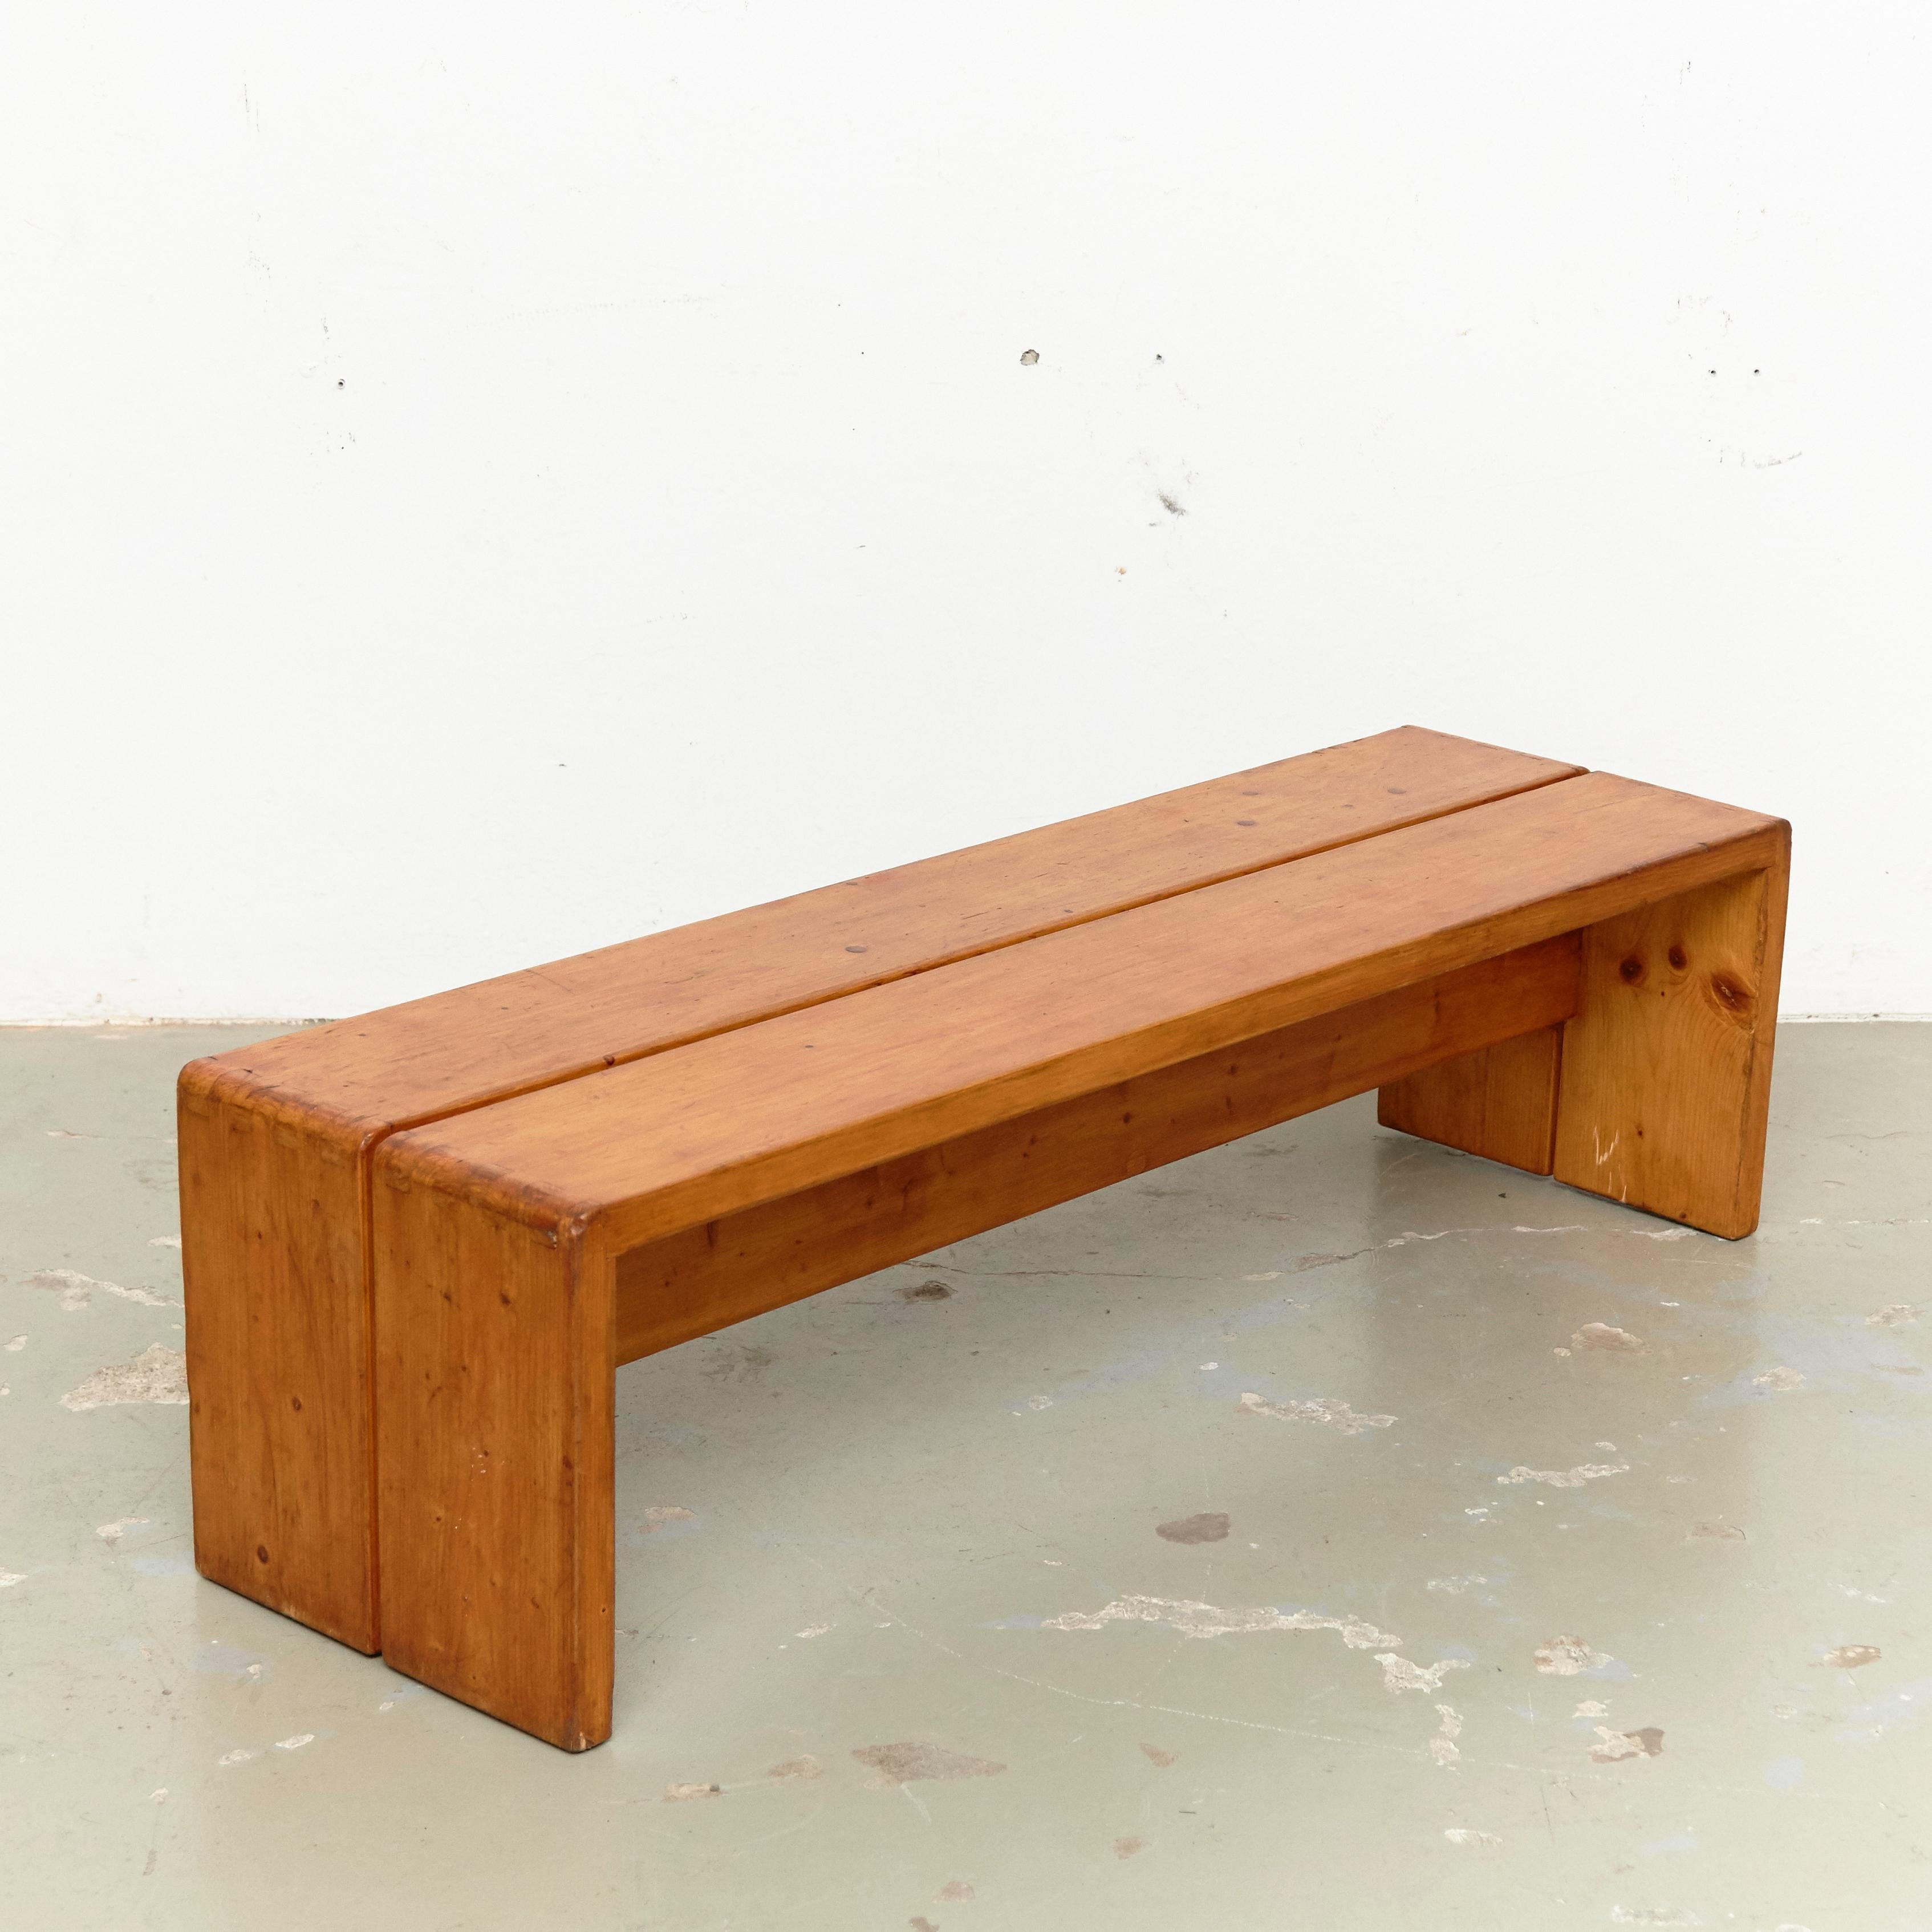 Pair of bench designed by Charlotte Perriand for Les Arcs ski resort circa 1960, manufactured in France.
Pinewood.

In original condition, with wear consistent with age and use, preserving a beautiful patina.

Charlotte Perriand (1903-1999) She